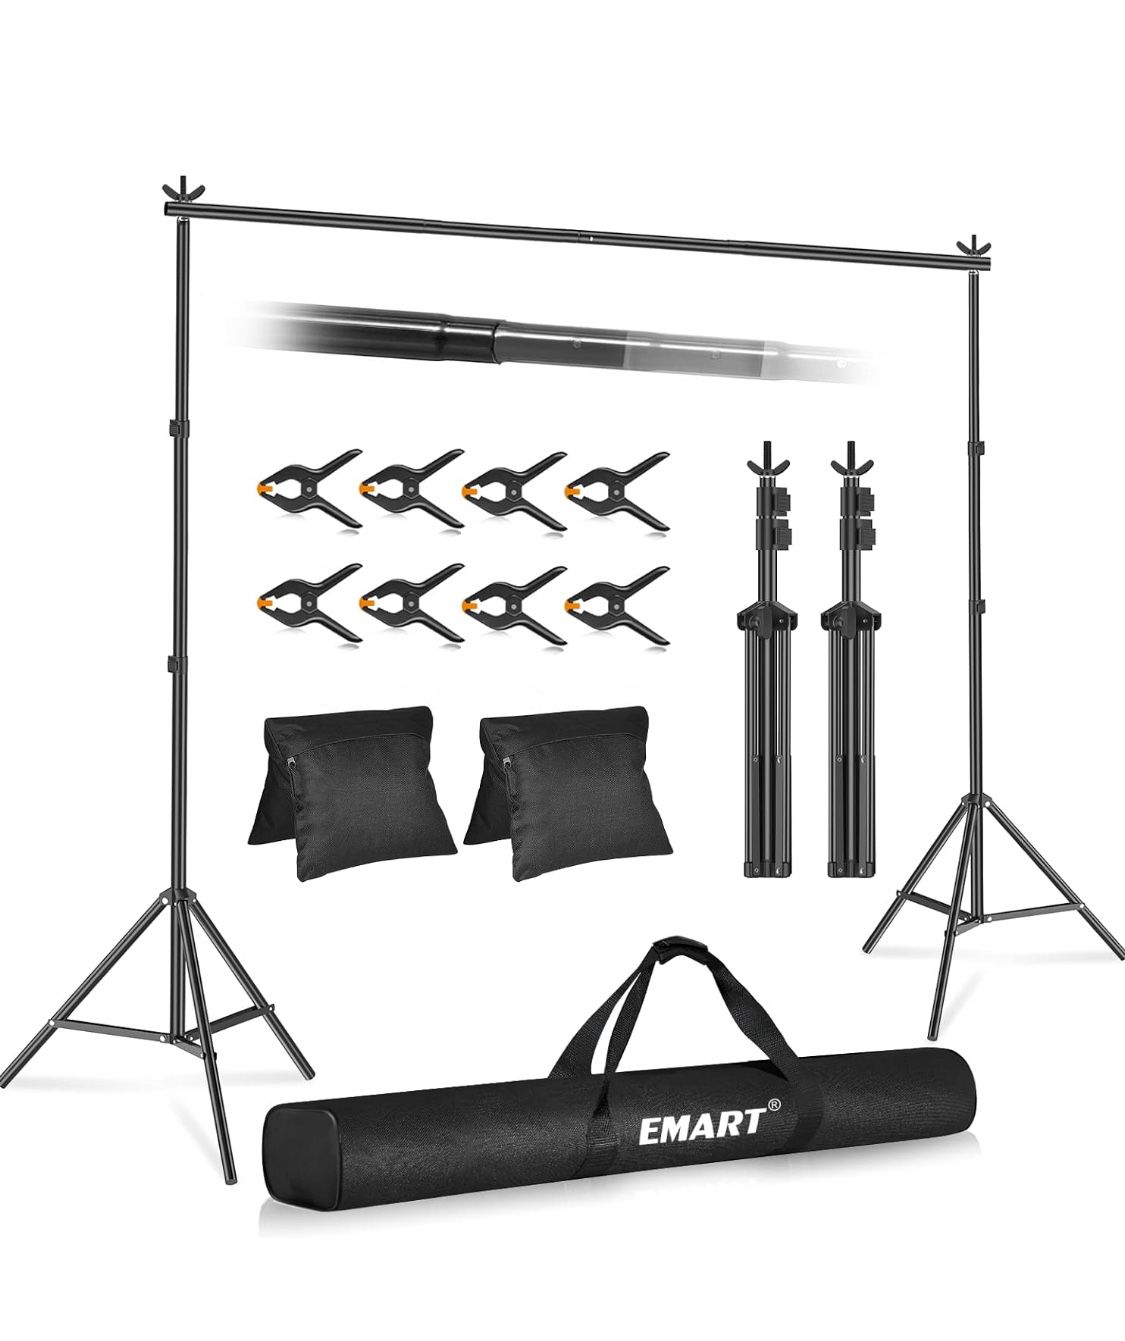 EMART Backdrop Stand 10x7ft(WxH) Photo Studio Adjustable Background Stand Support Kit with 2 Crossbars, 8 Backdrop Clamps, 2 Sandbags and Carrying Bag